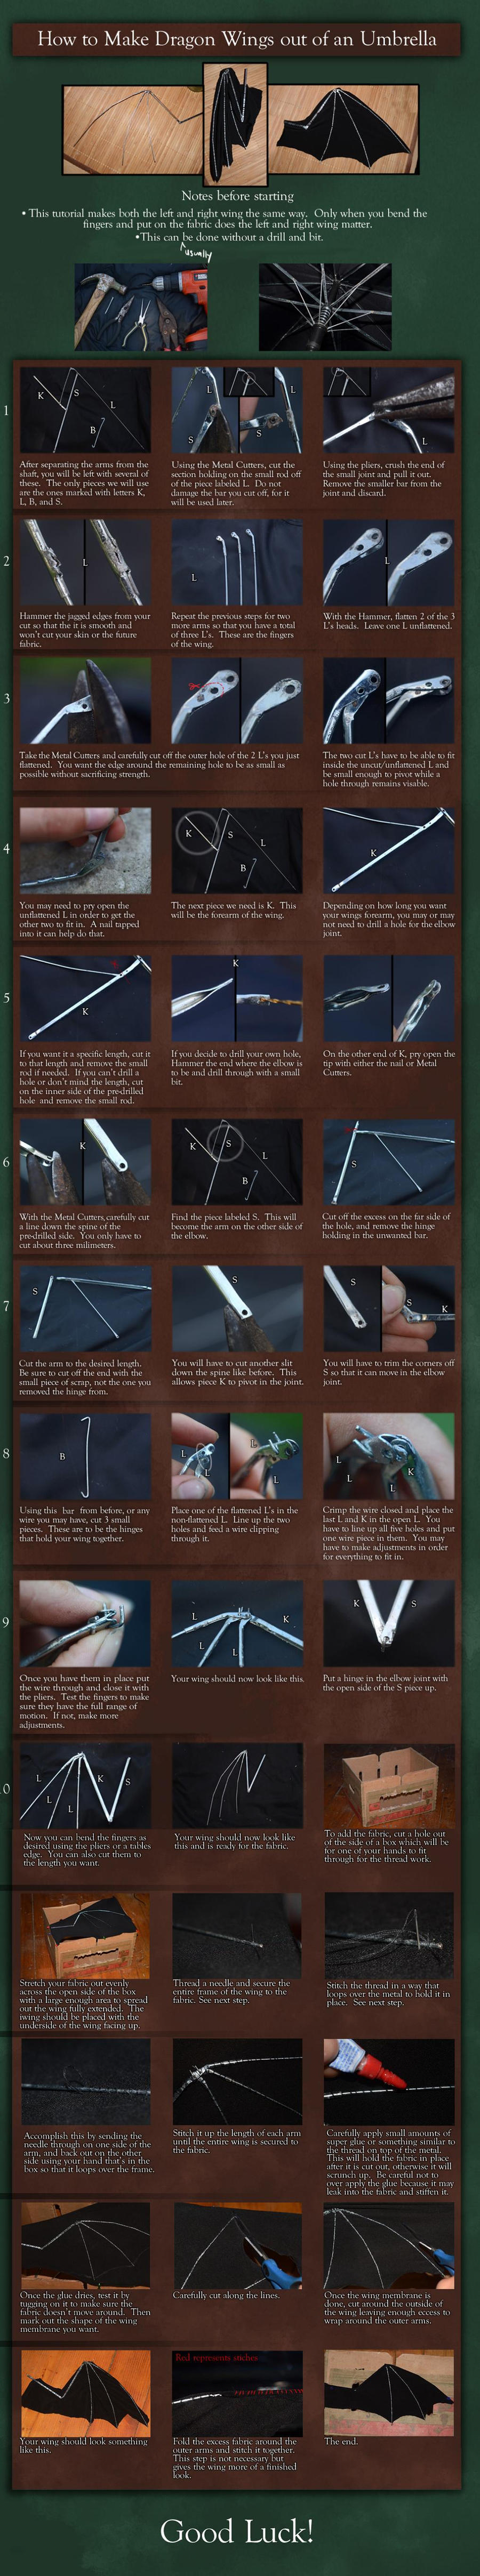 Dragon Wing out of an Umbrella - Tutorial